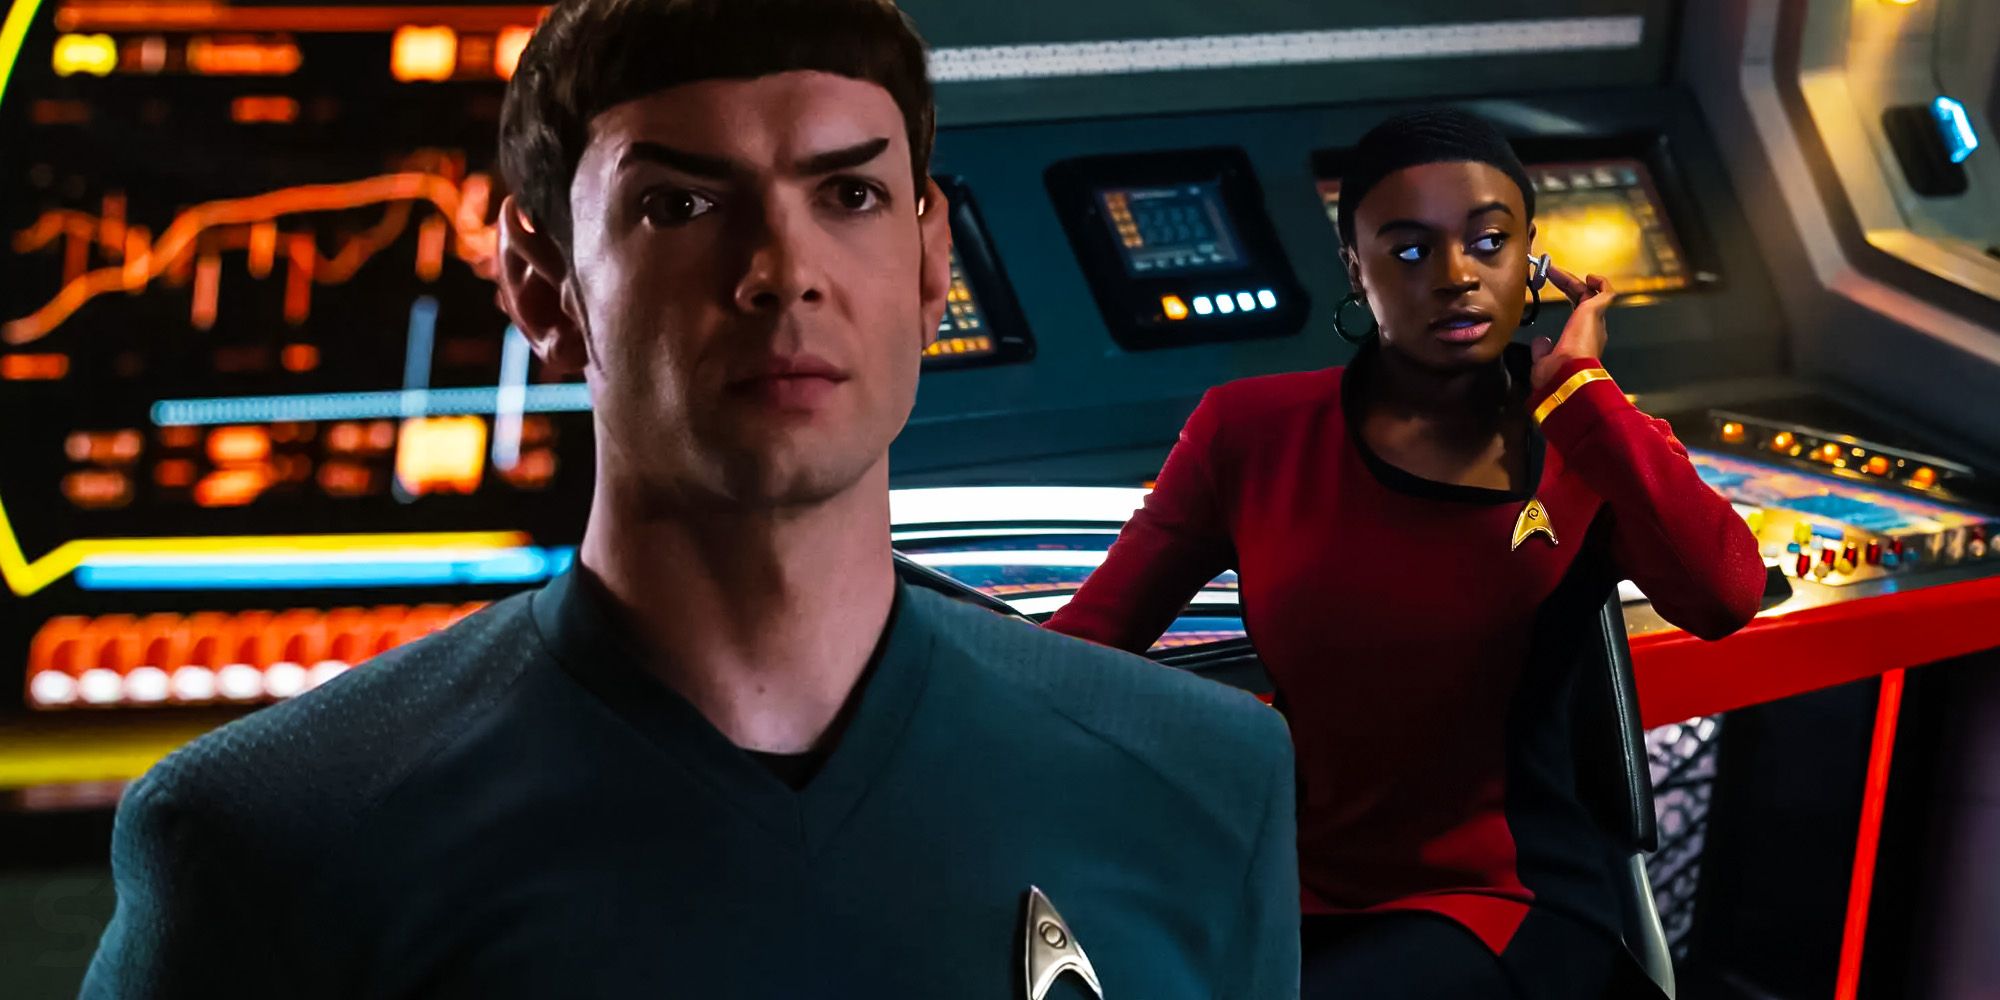 Strange new worlds spock and uhura passed their toughest test